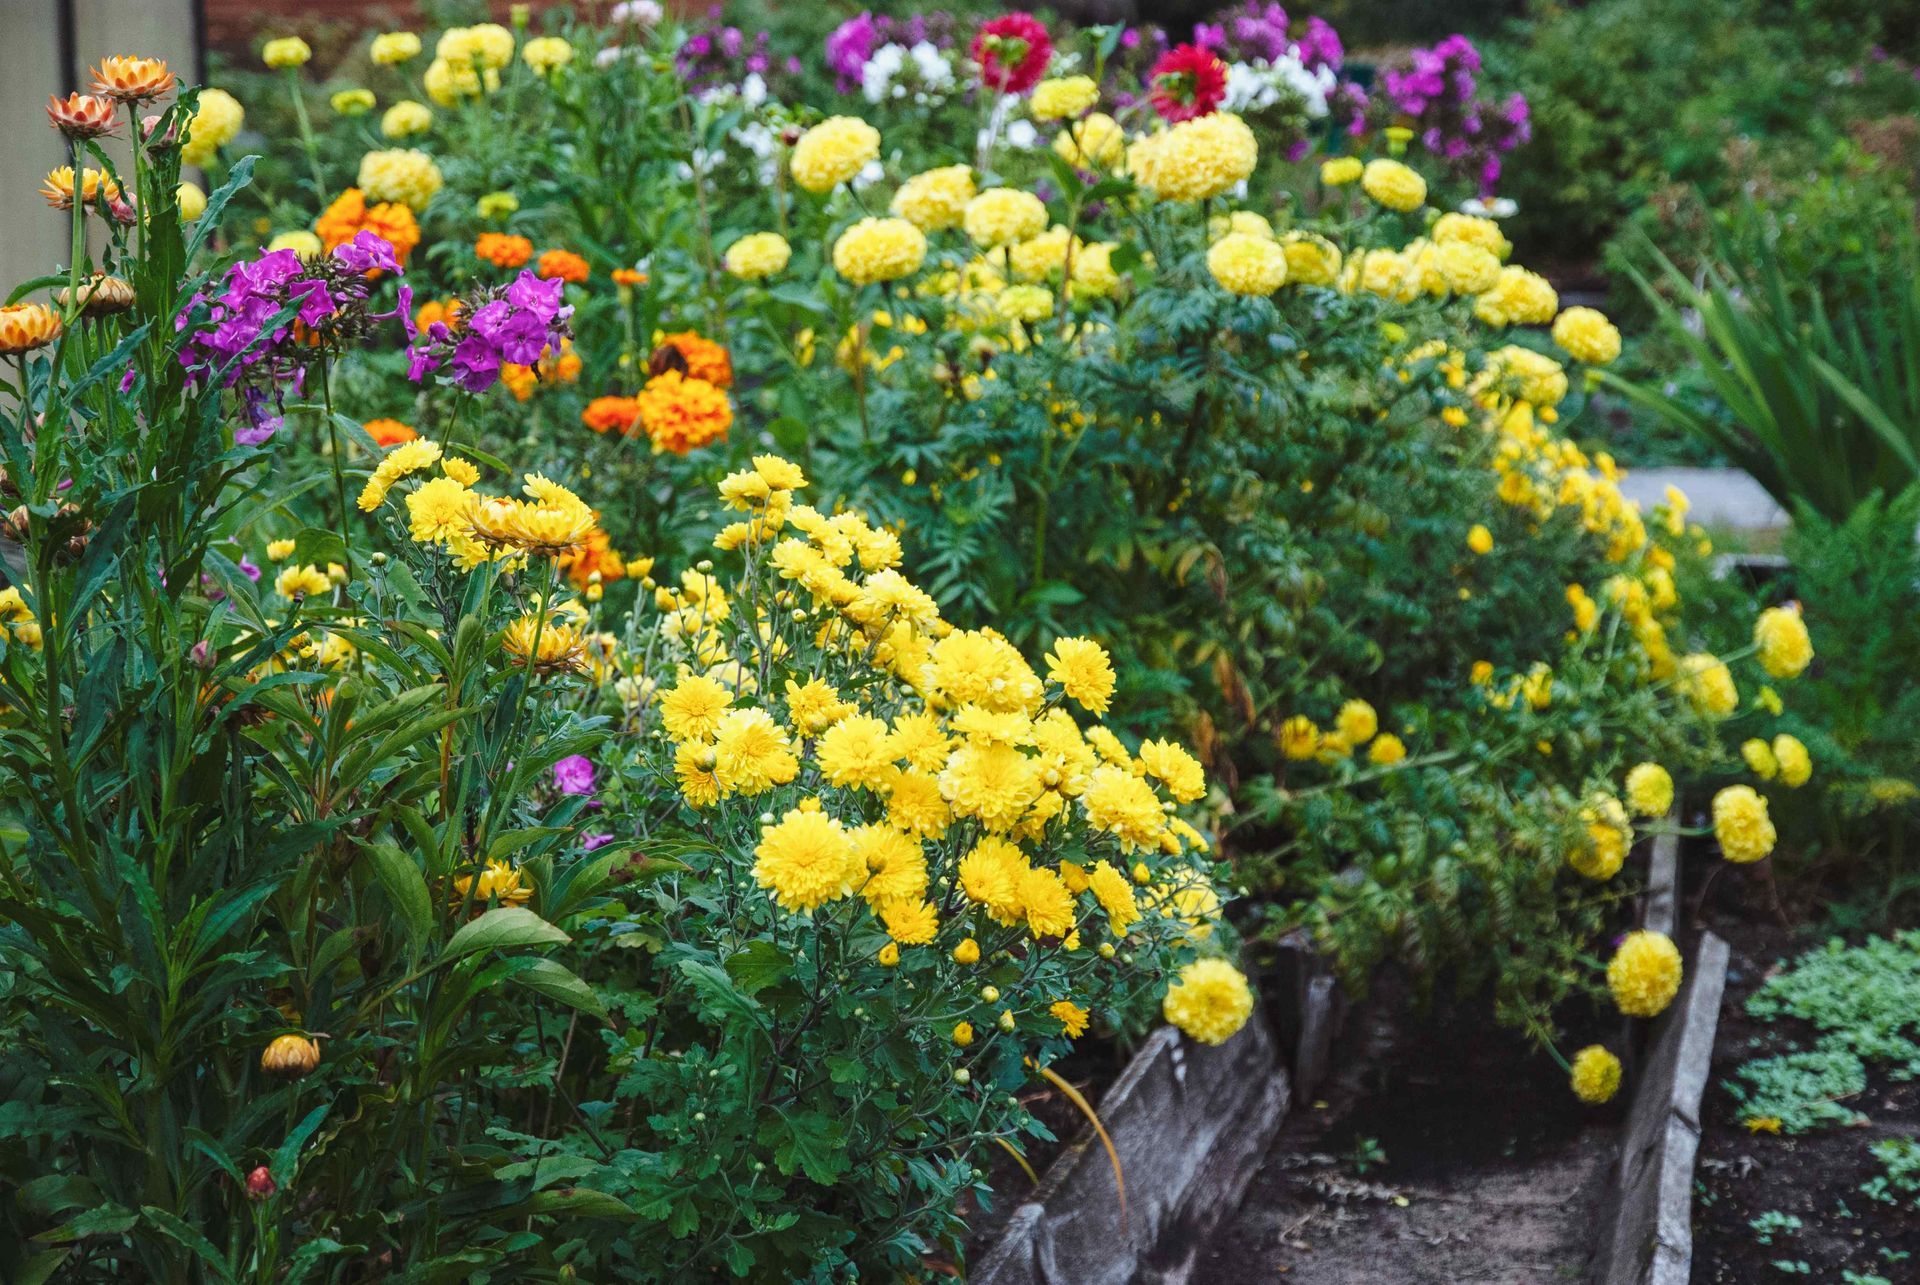 Affordable Flowerbed with Yellow and Orange Marigolds